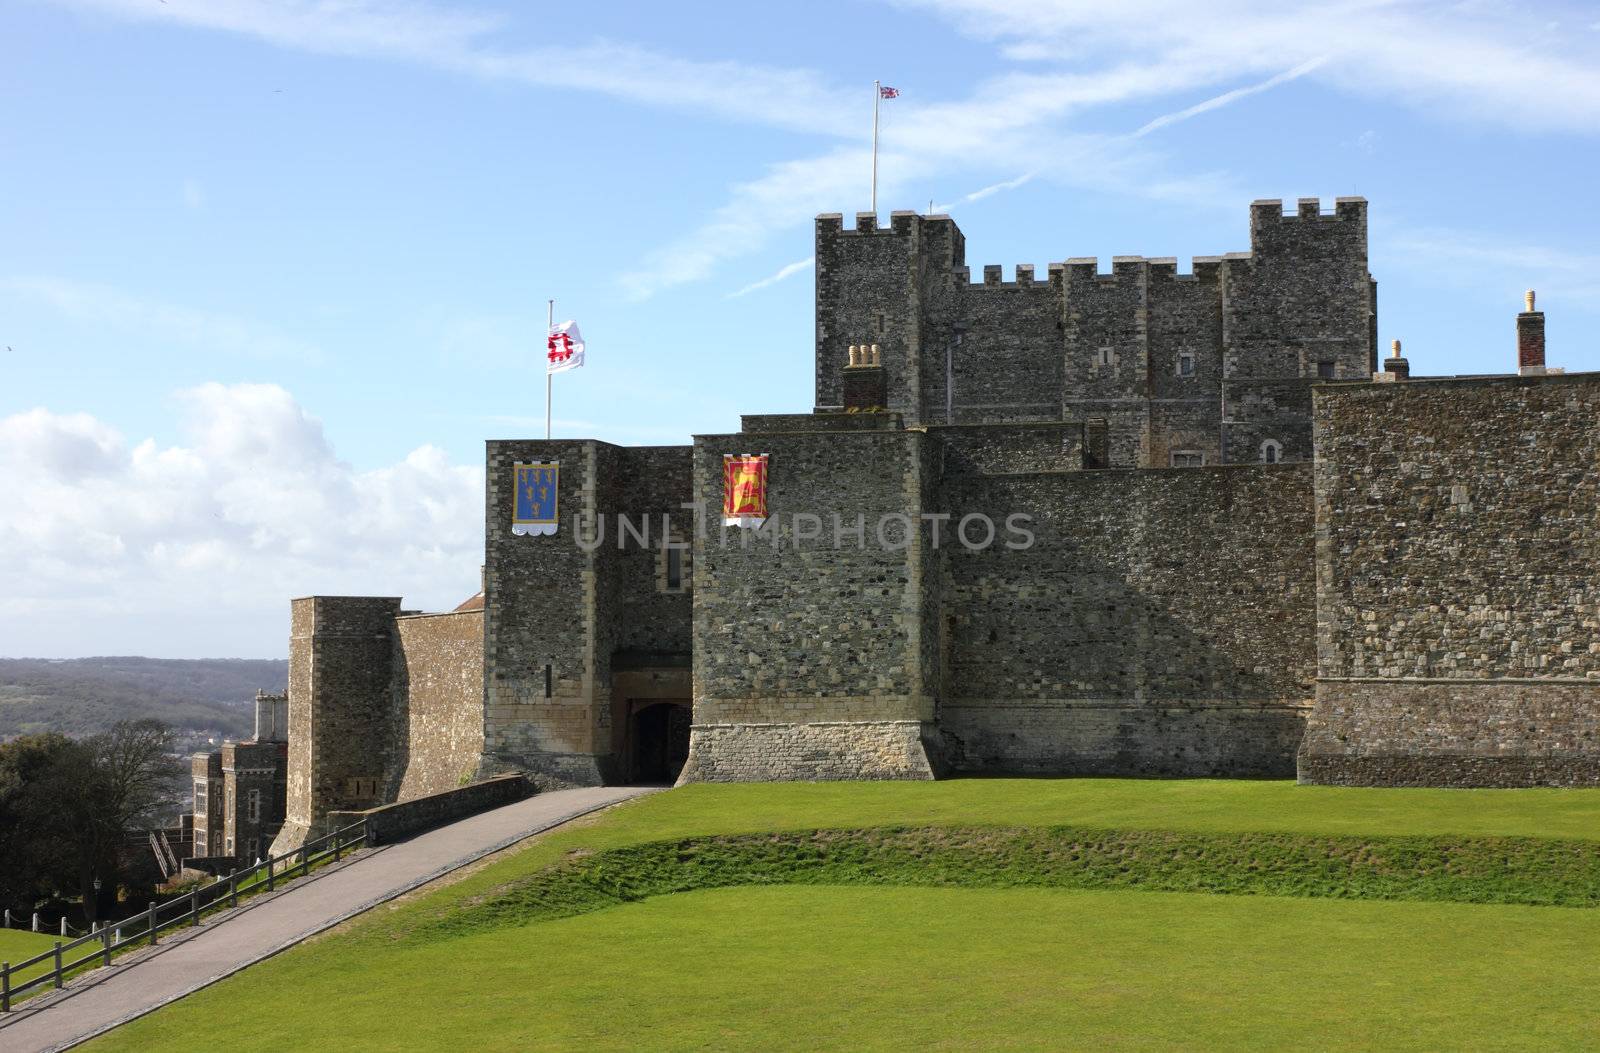 Dover Castle - a distant shot of the medieval fortress in United Kingdom, county of Kent.